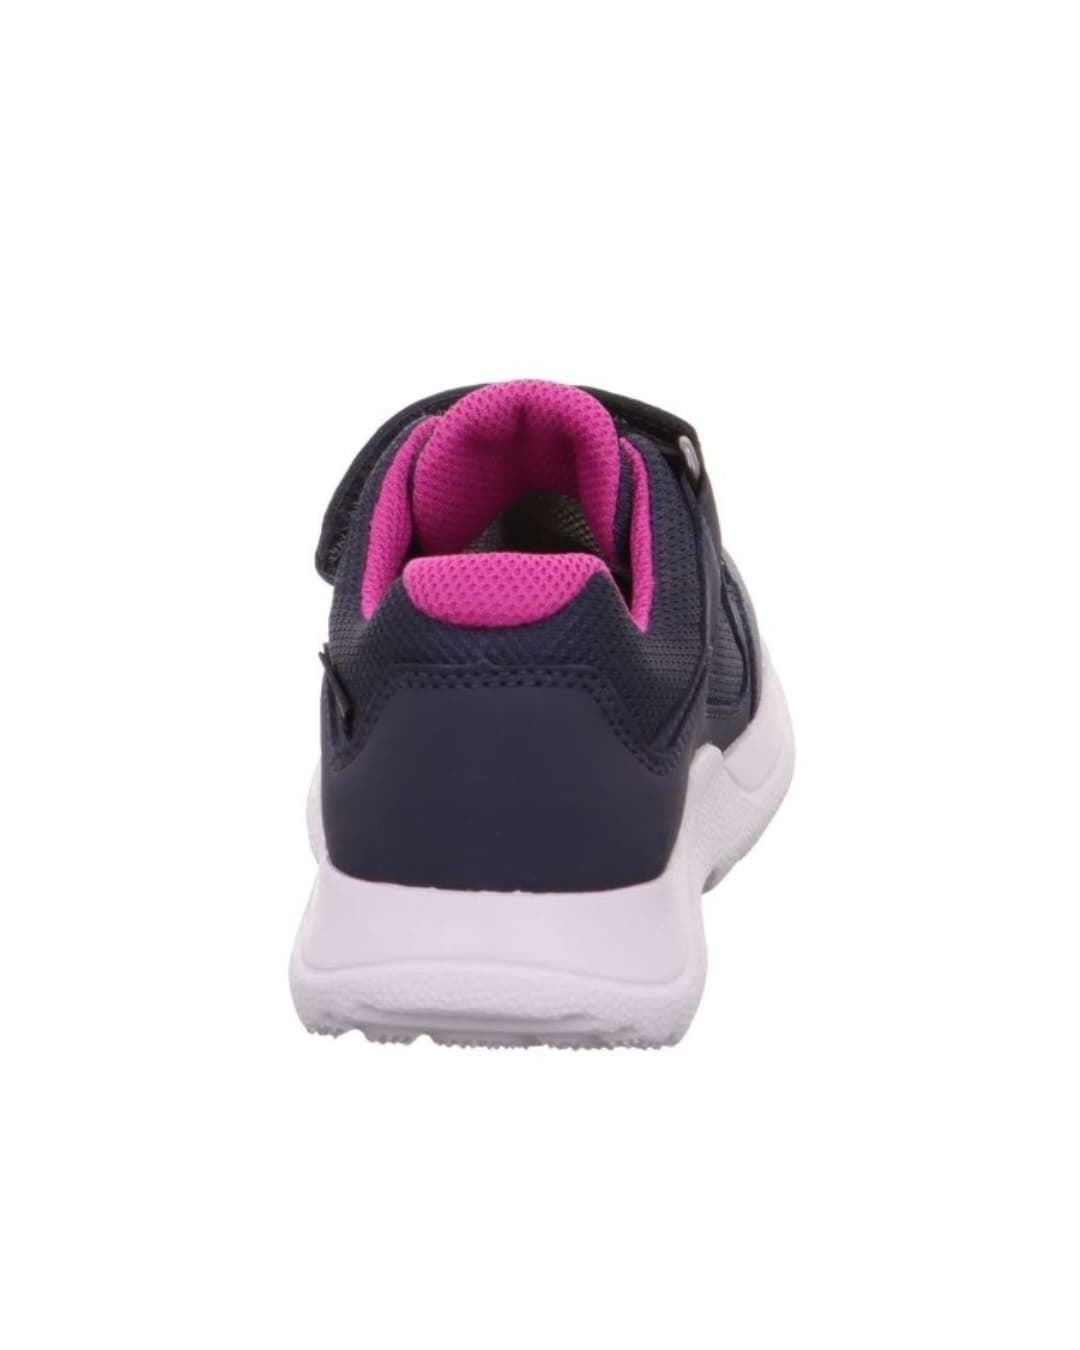 Superfit sneakers for girls Gore-tex Navy Blue - Image 4